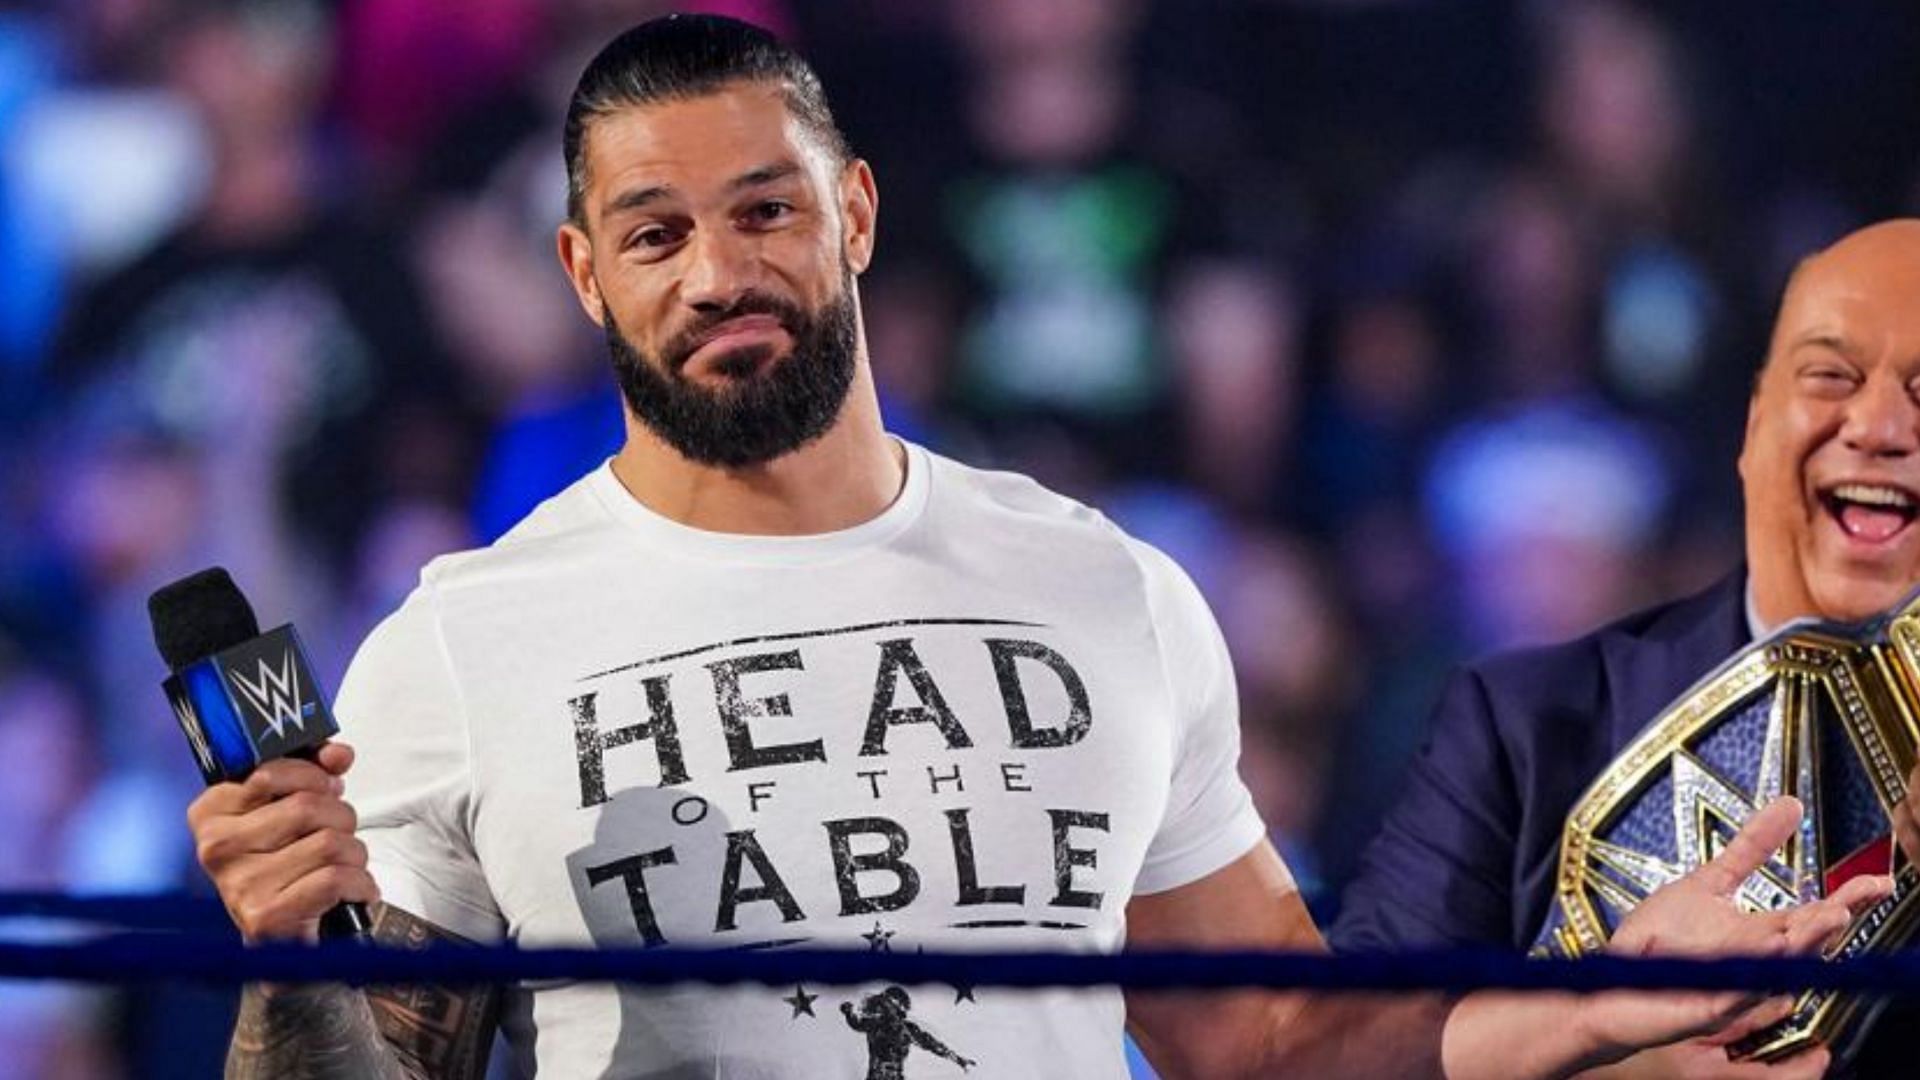 Will current free agent go after the Undisputed WWE Universal Champion Roman Reigns?